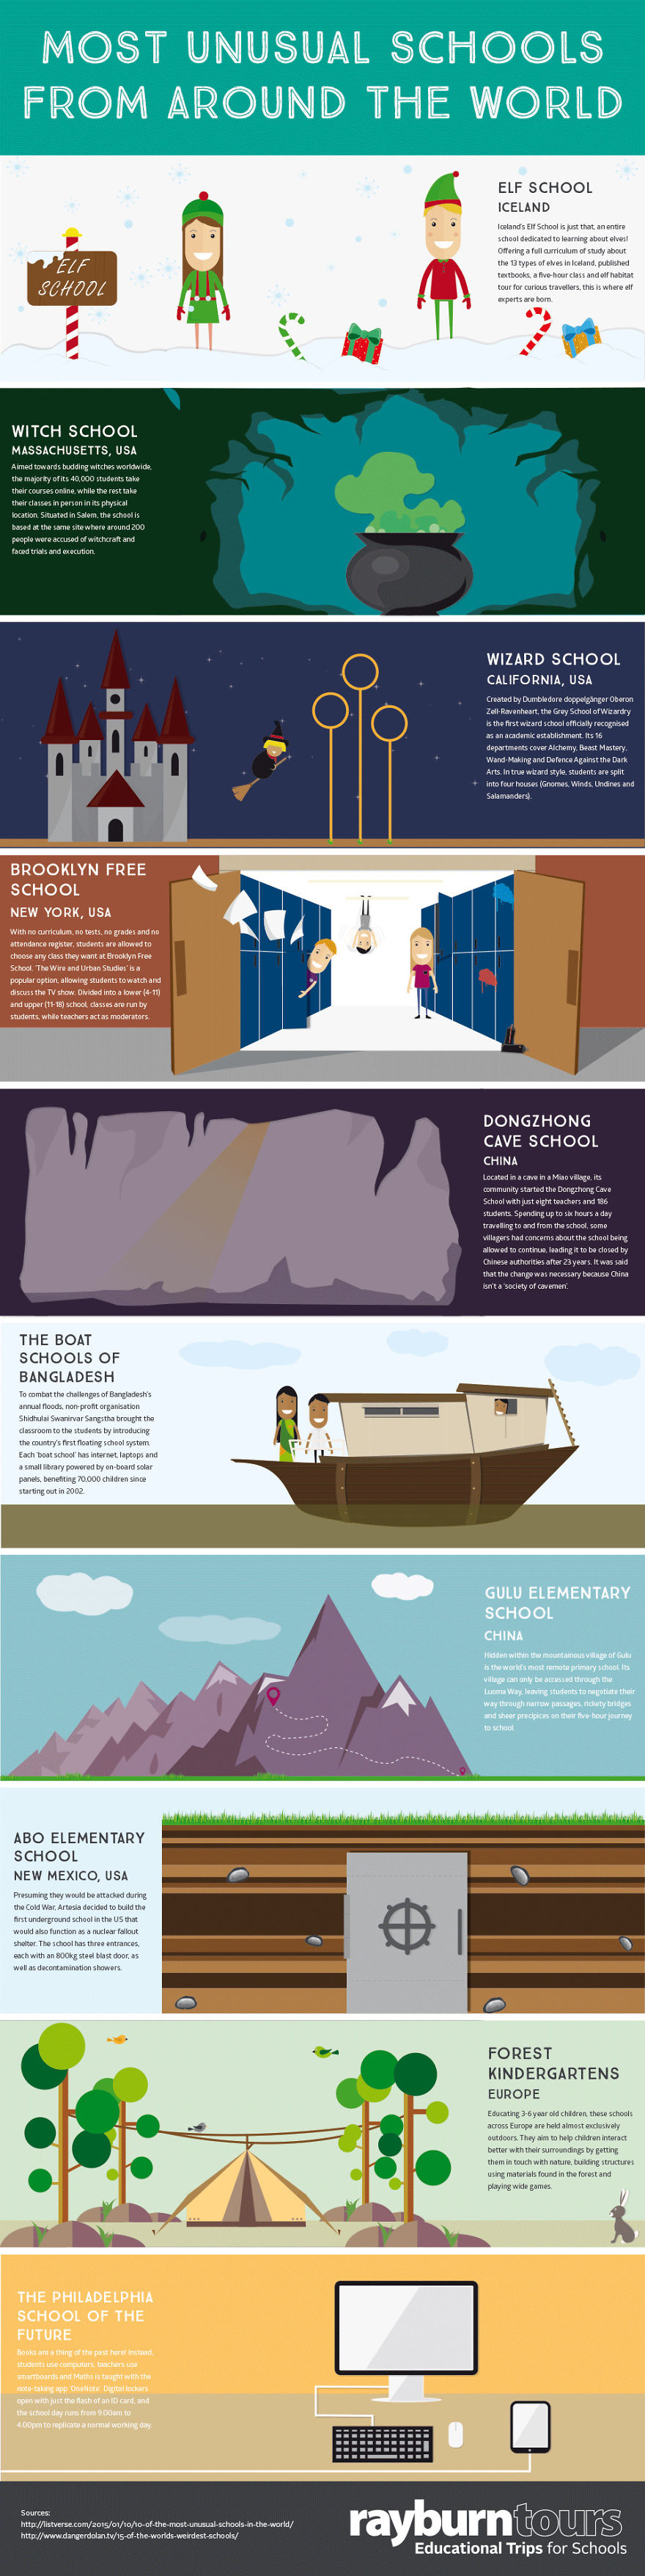 We Created An Infographic About The Most Unusual Schools In The World